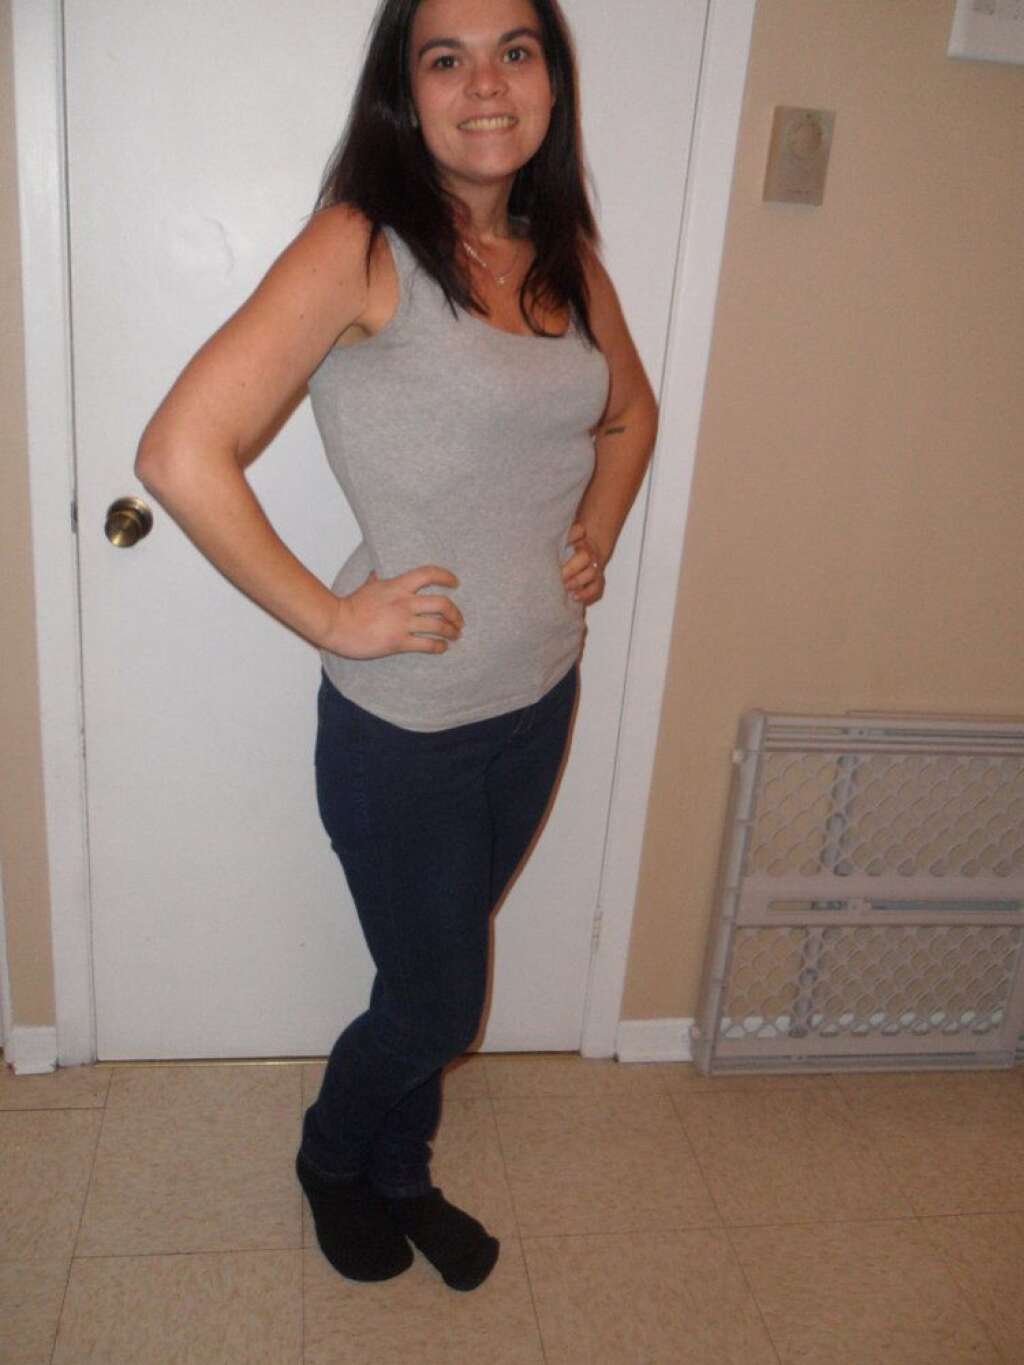 Julie AFTER - <a href="http://www.huffingtonpost.ca/2014/06/17/weight-lost_n_5503144.html" target="_blank">Read the story here. </a>